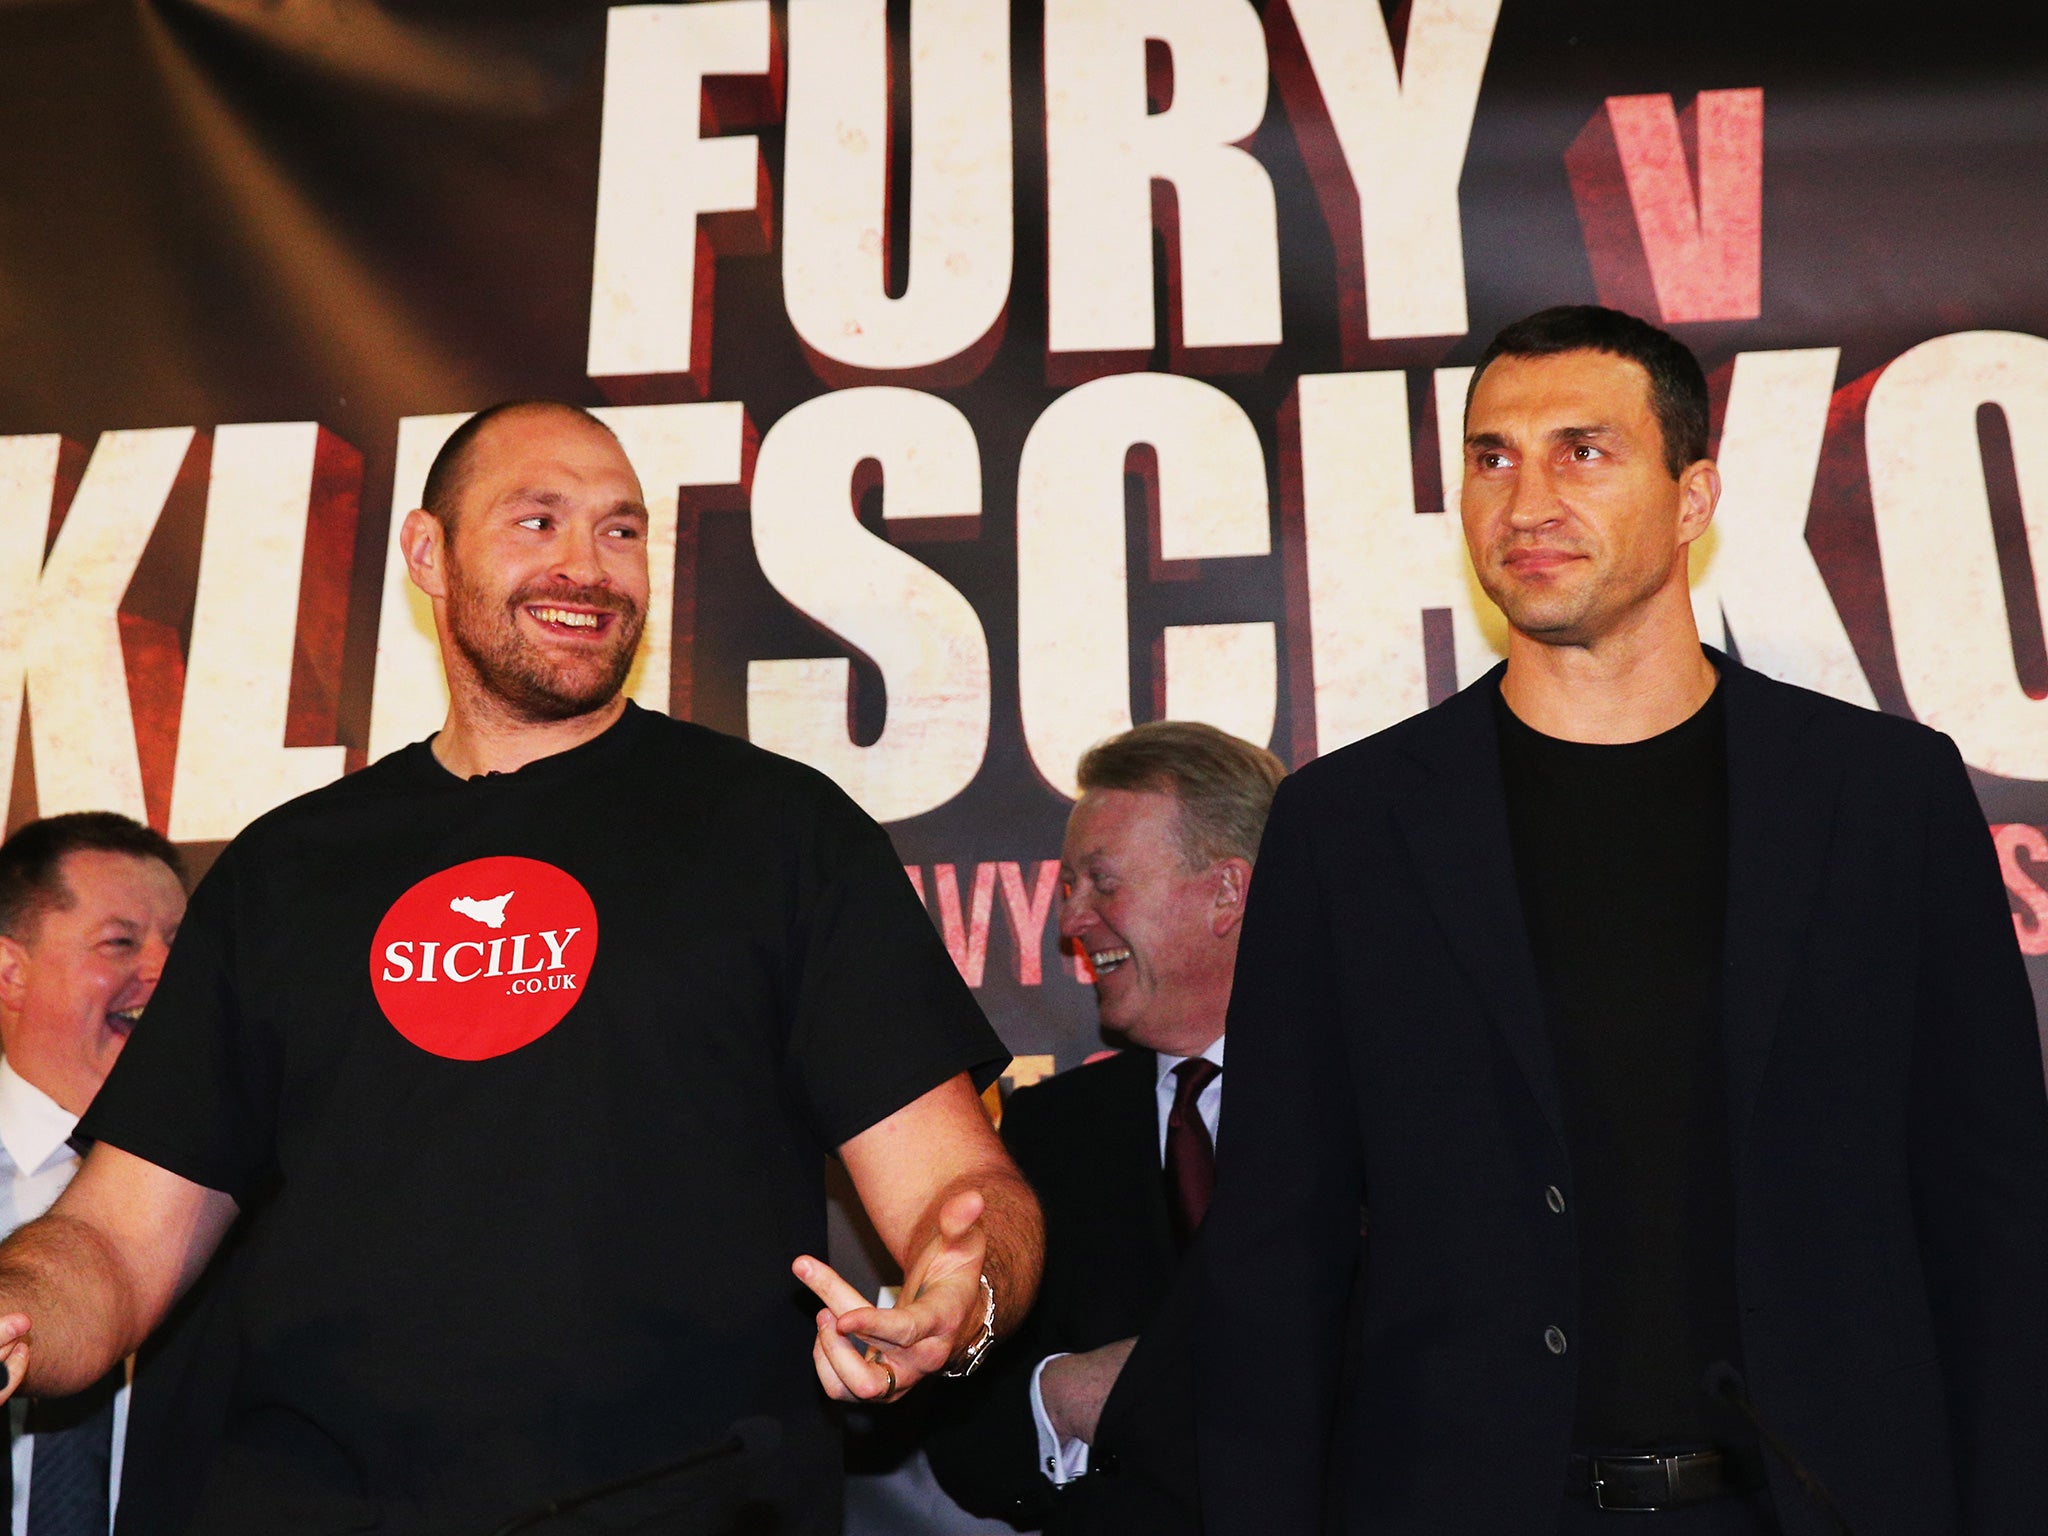 Fury and Klitschko at a pre-fight press conference ahead of the original 9 July date